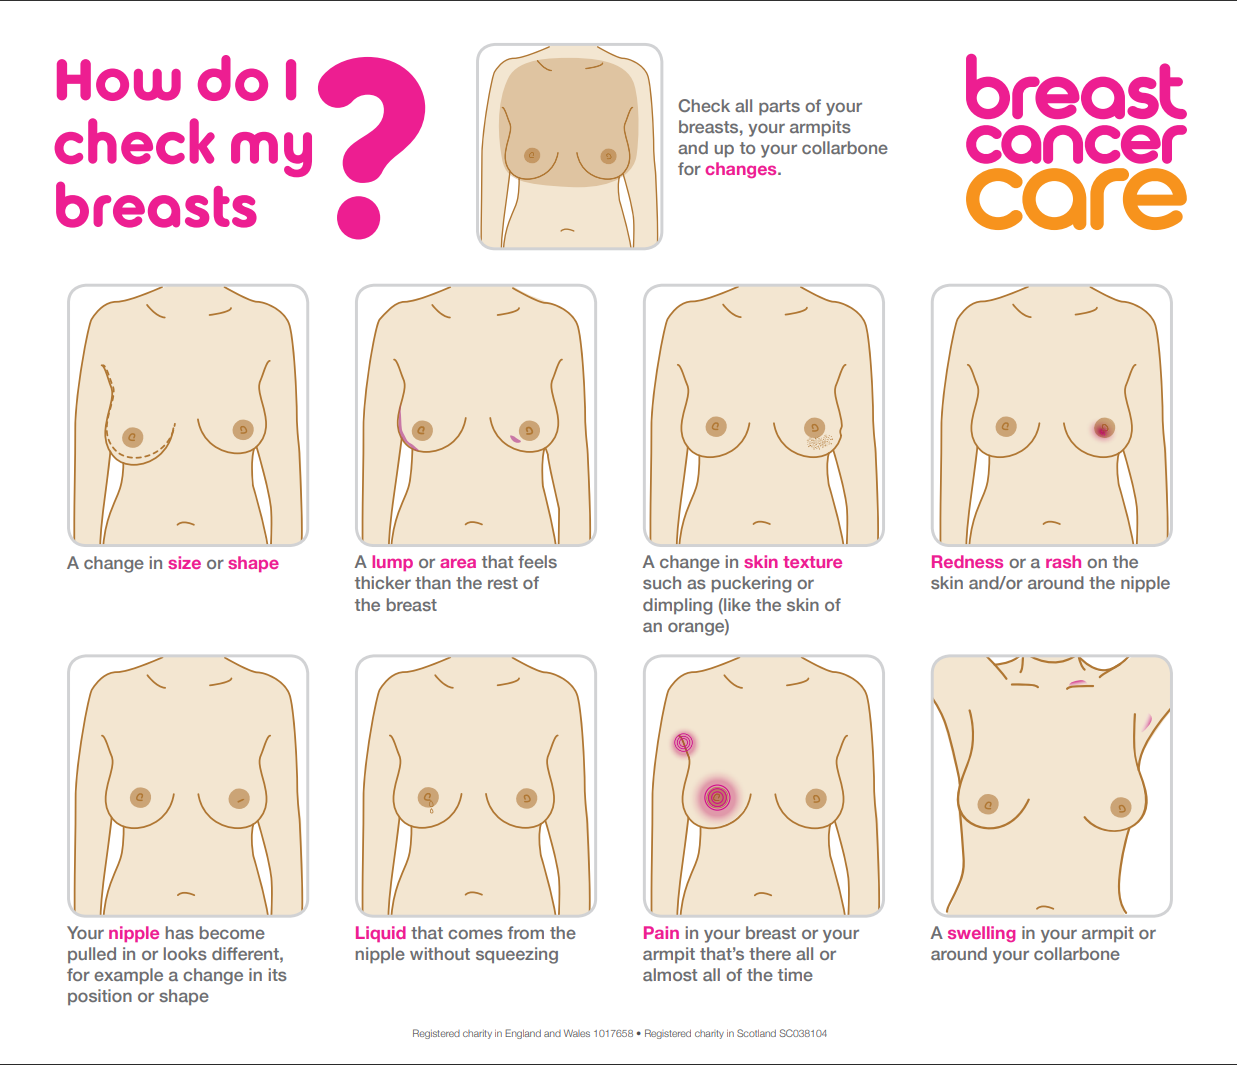 My Breasts Are Different Sizes – Am I Normal?